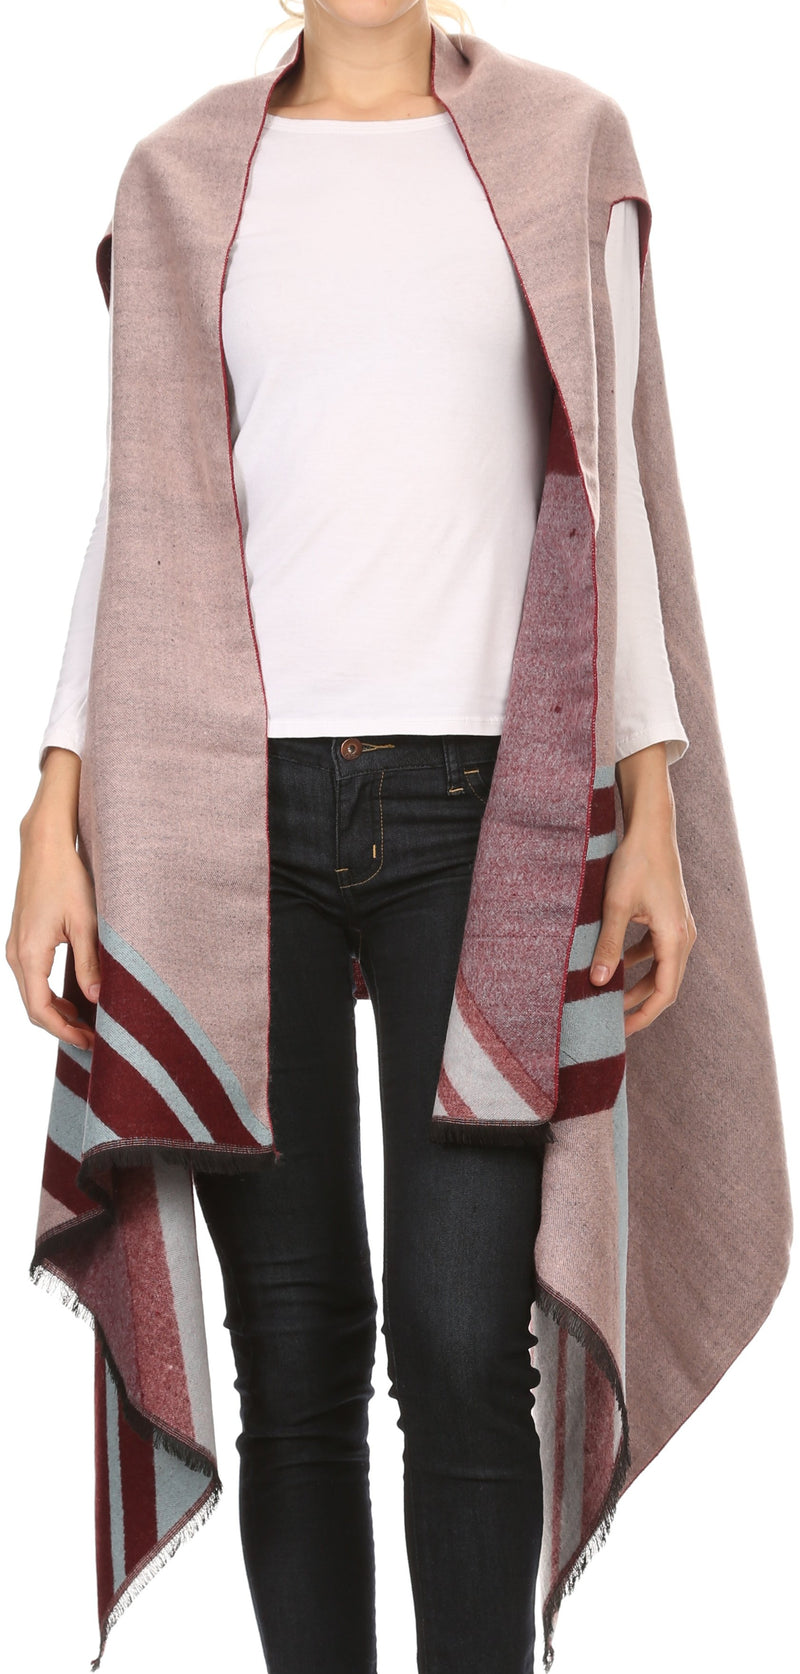 Sakkas Janeek Thick Warm Long Tapered Striped Multi Color Block Poncho Cape Wrap